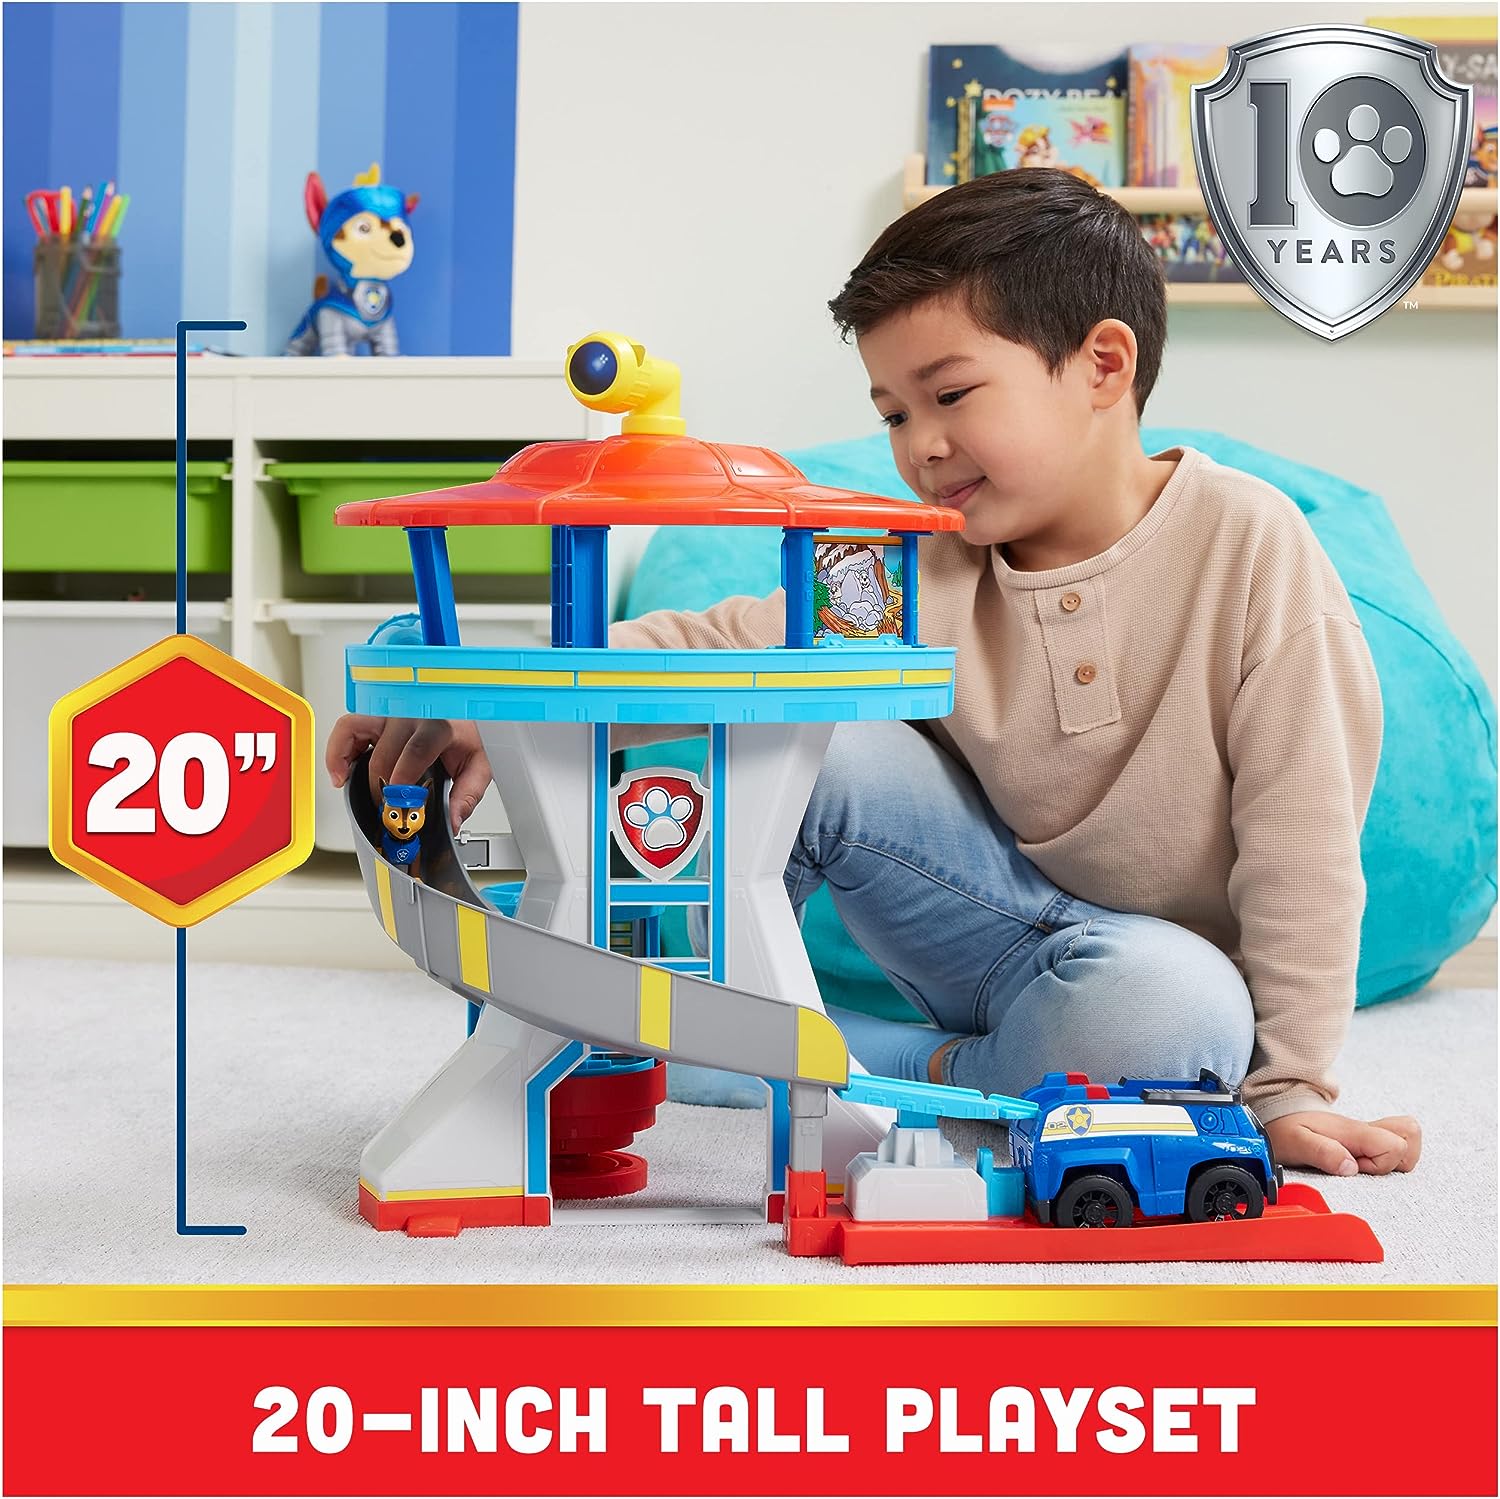 Paw Patrol Lookout Tower Playset with Toy Car Launcher, 2 Chase Action Figures, Chase’s Police Cruiser and Accessories, Kids Toys for Ages 3 and up